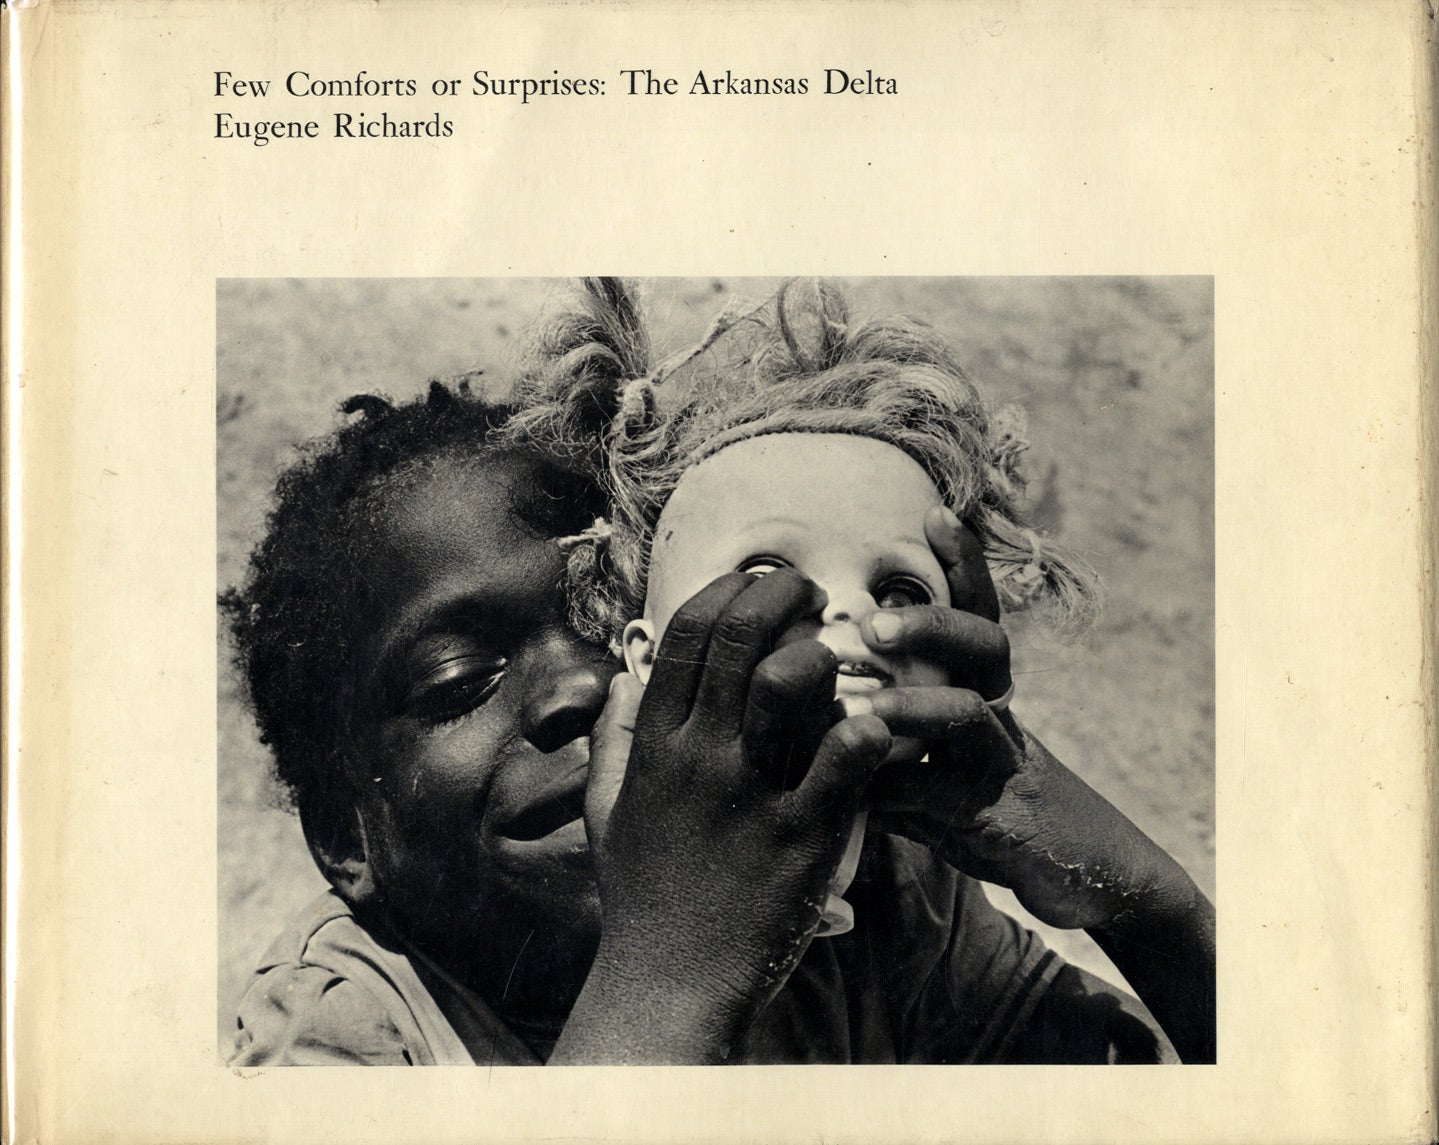 Eugene Richards: Few Comforts or Surprises: The Arkansas Delta (First Hardcover Edition)